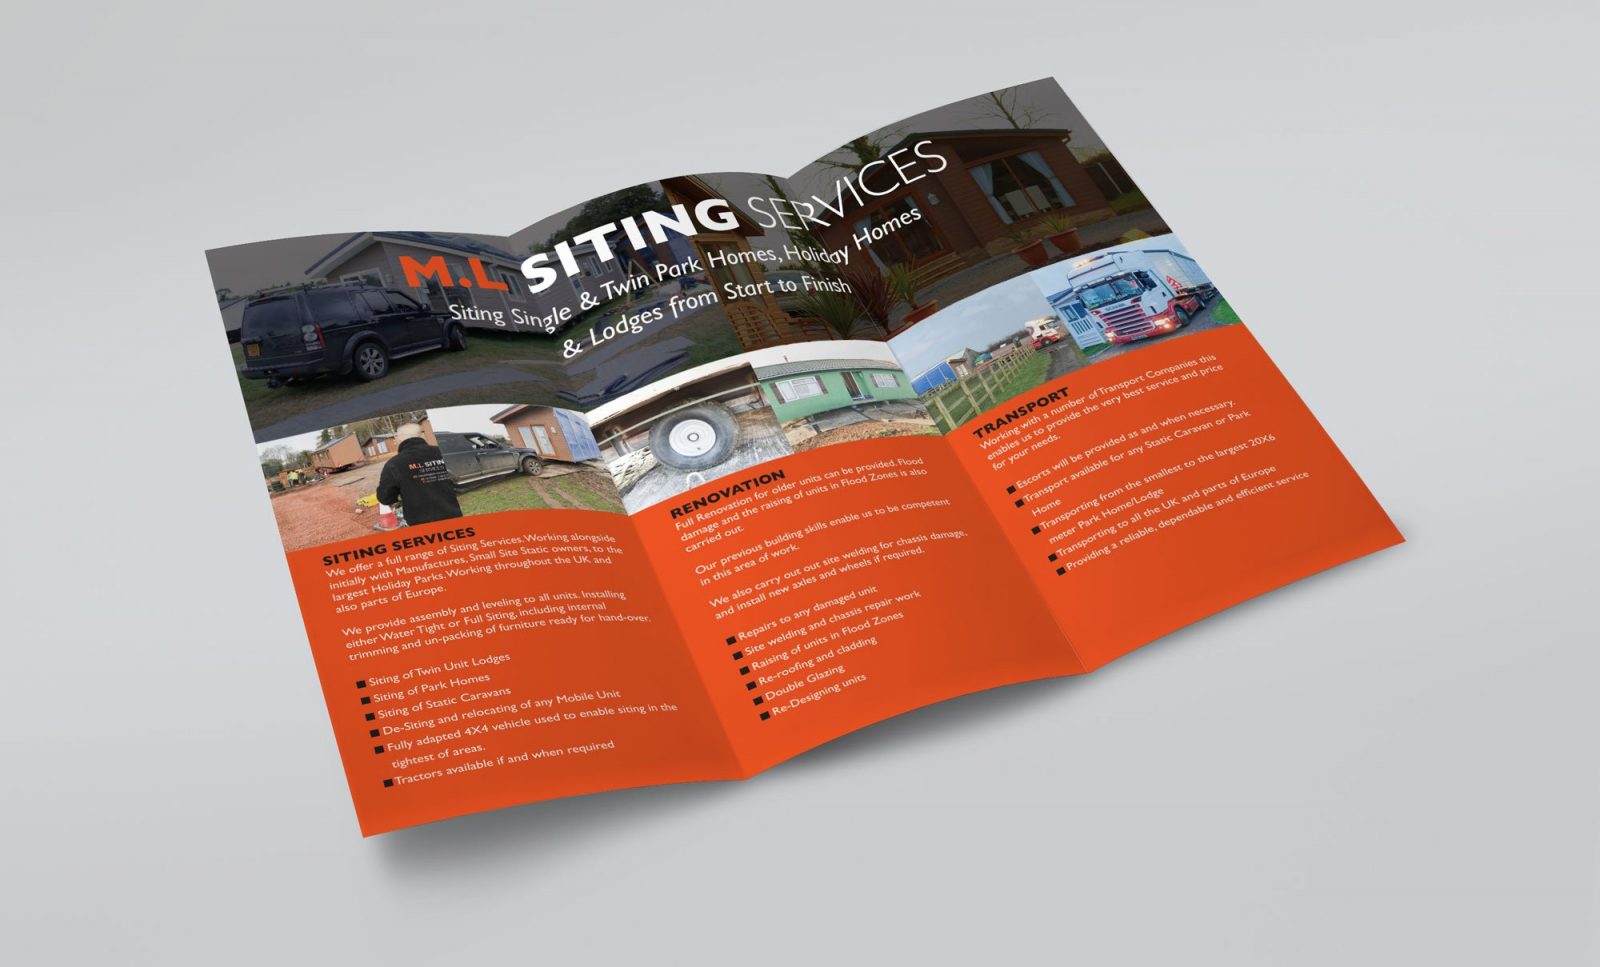 An A4 folded leaflet design for M.L Siting Services, showing the inner pages